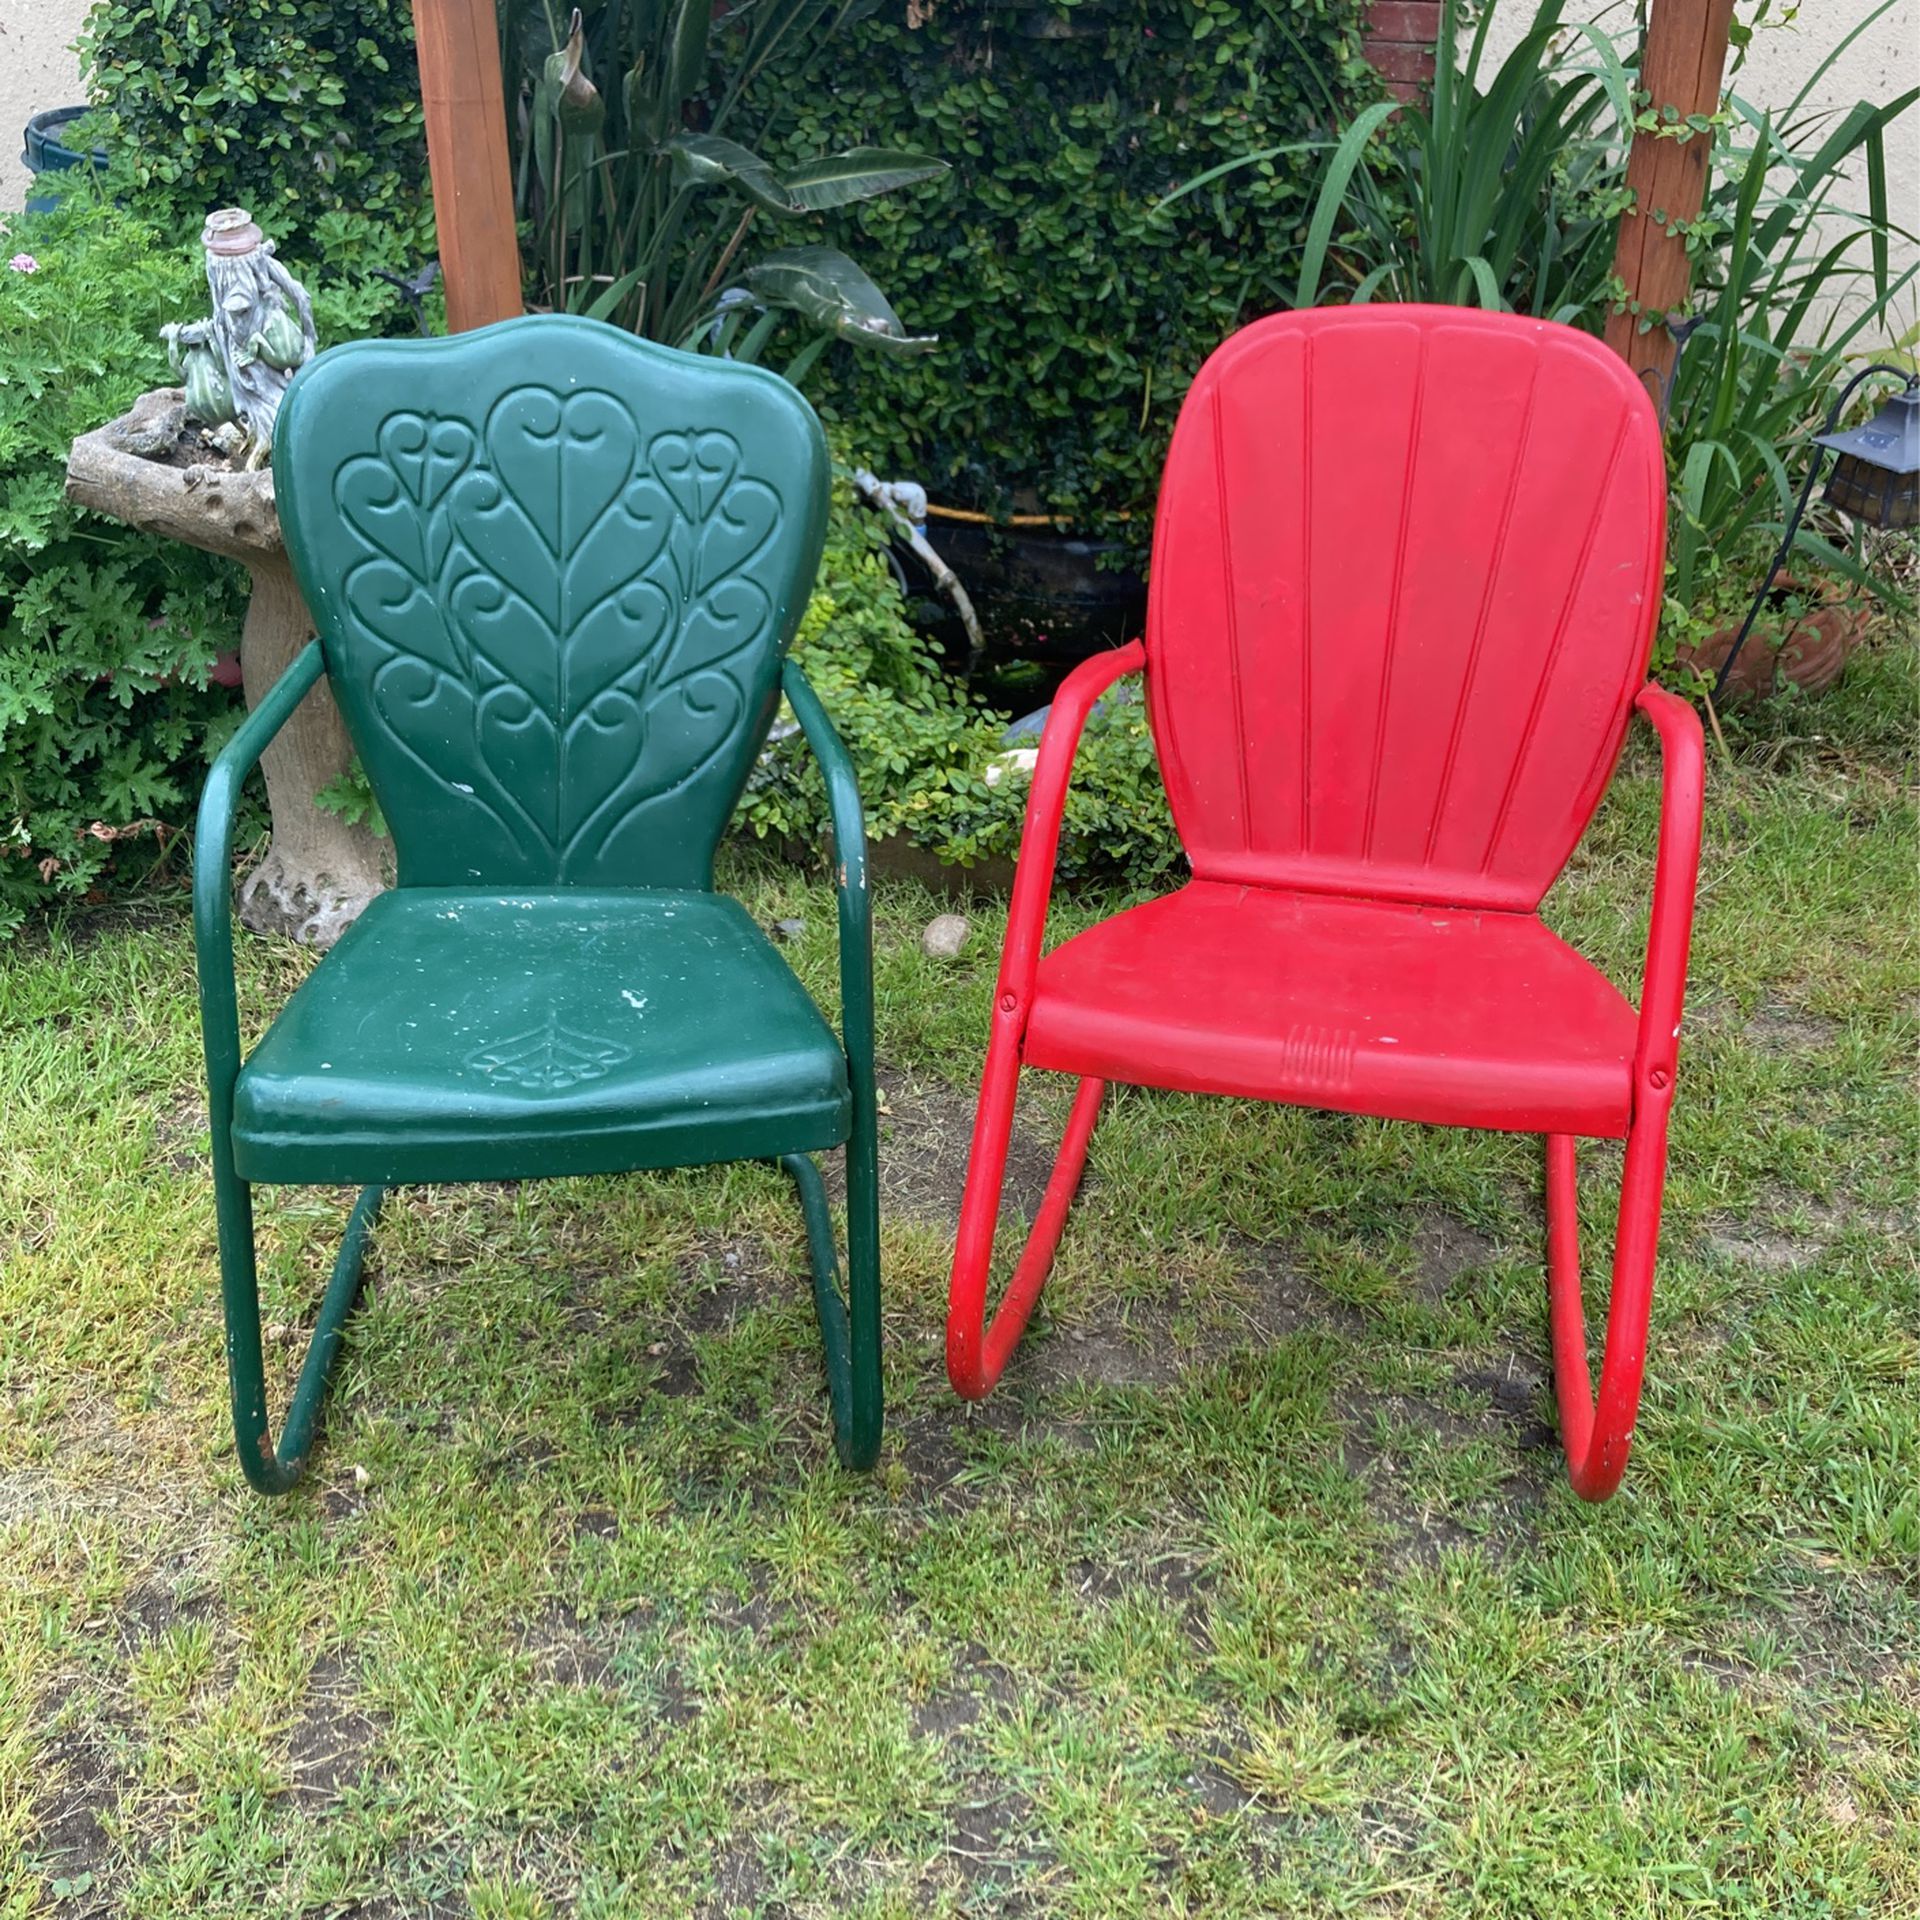 Antique Outdoor Chairs